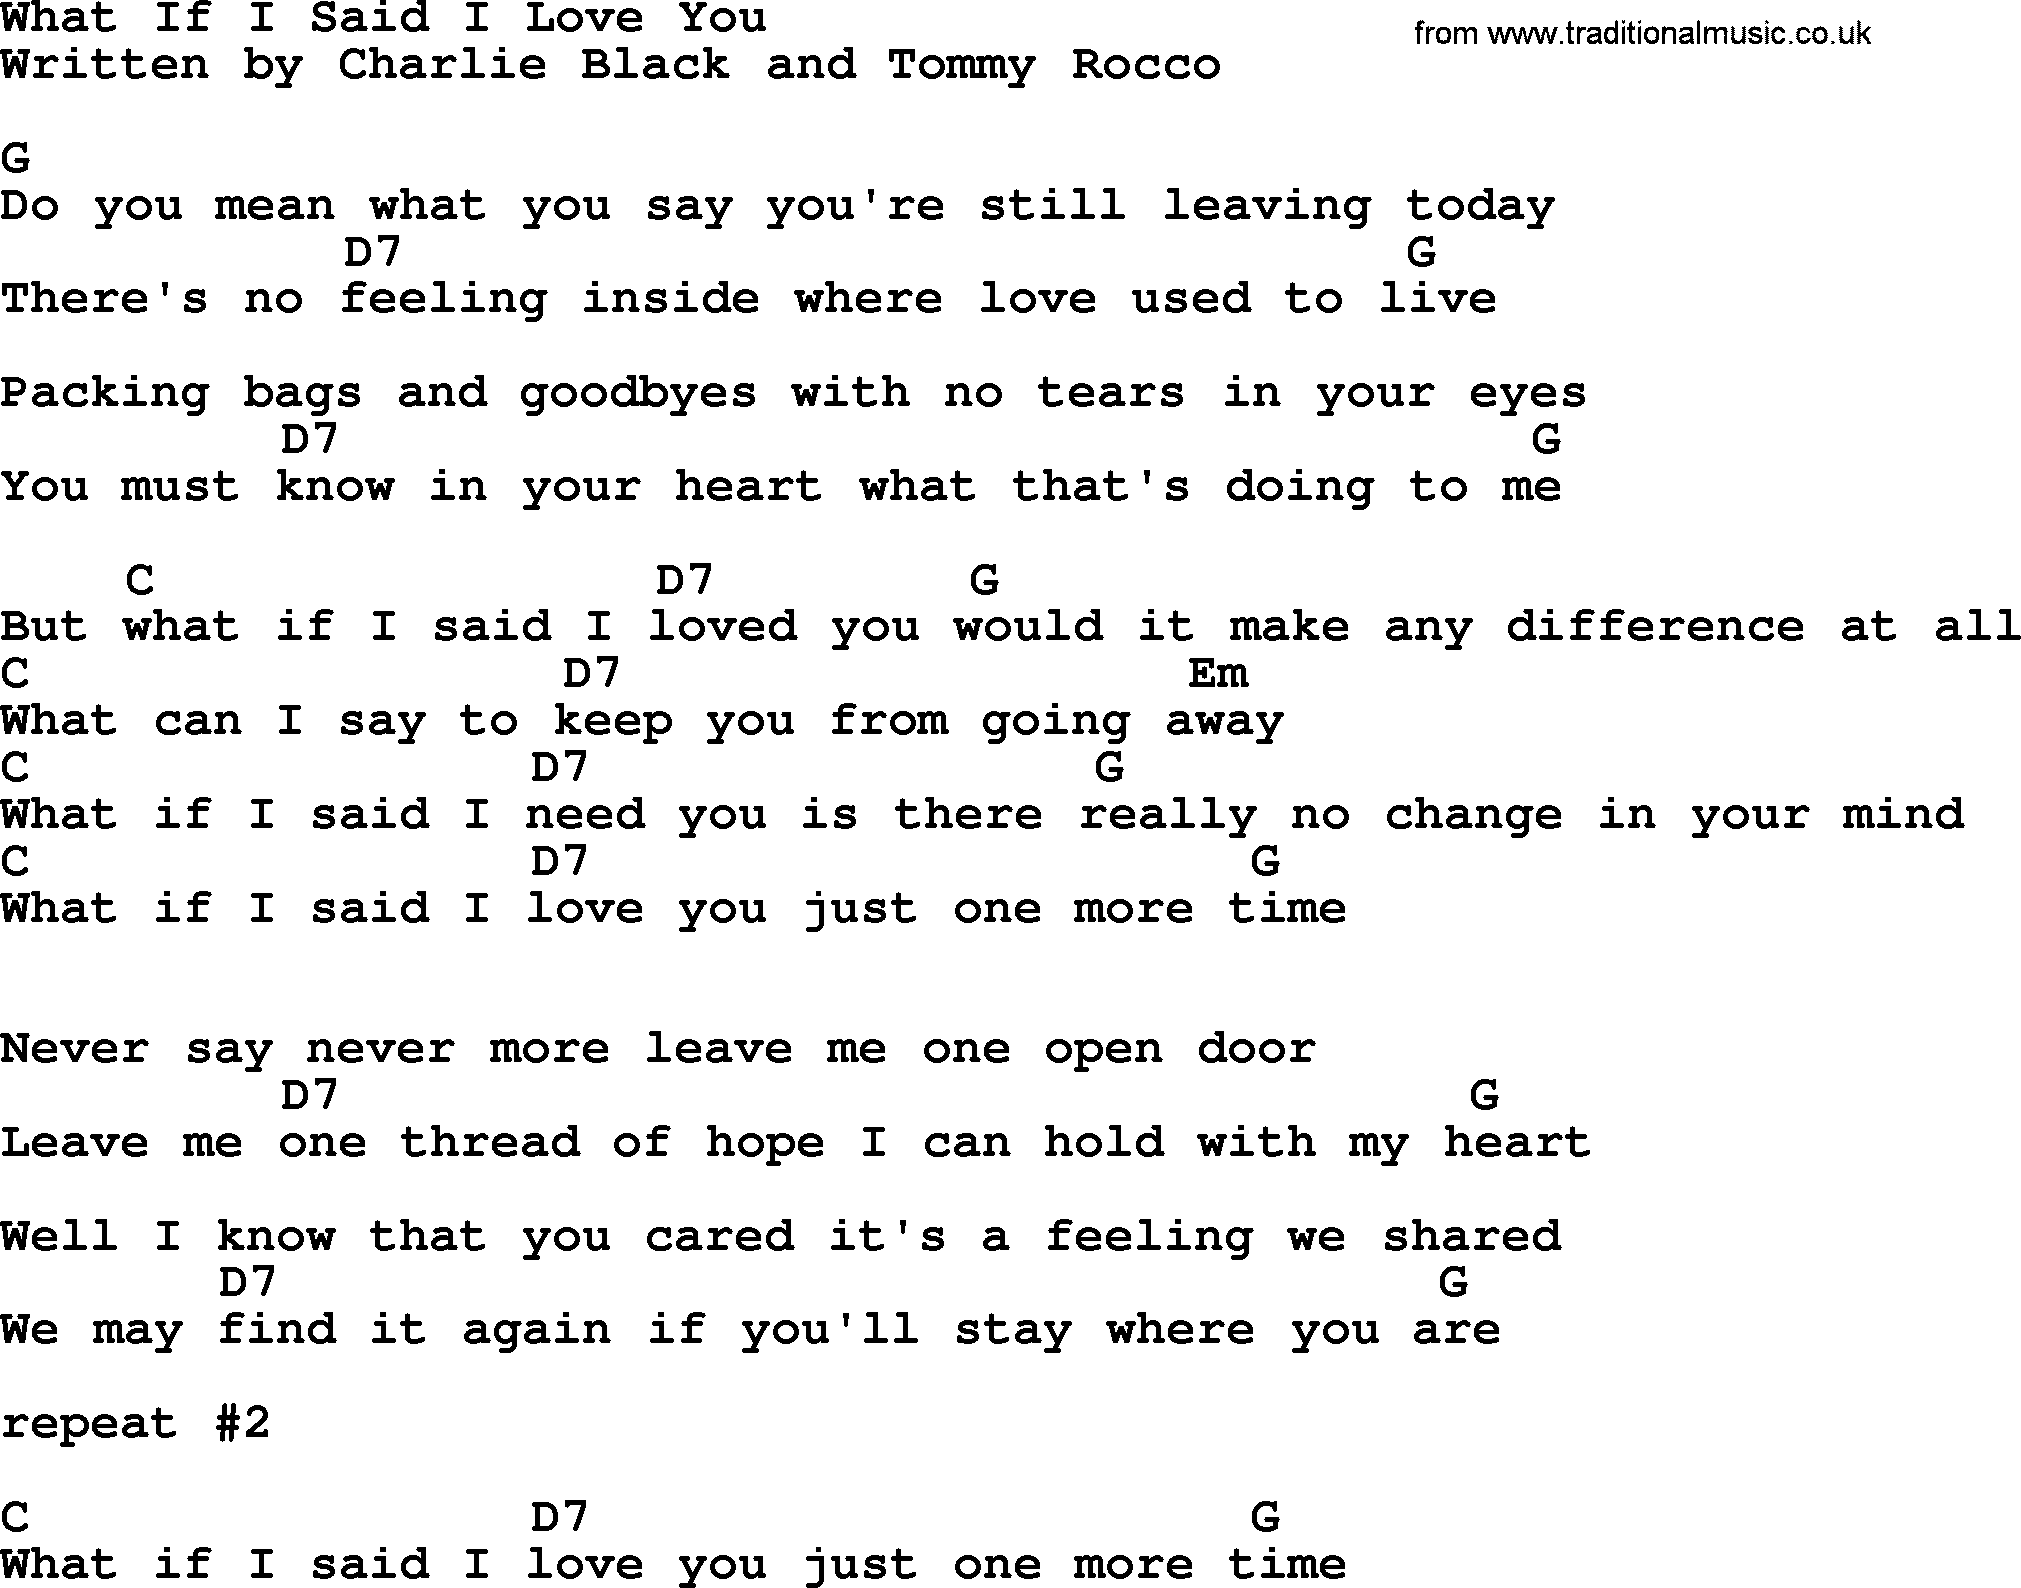 Marty Robbins song: What If I Said I Love You, lyrics and chords